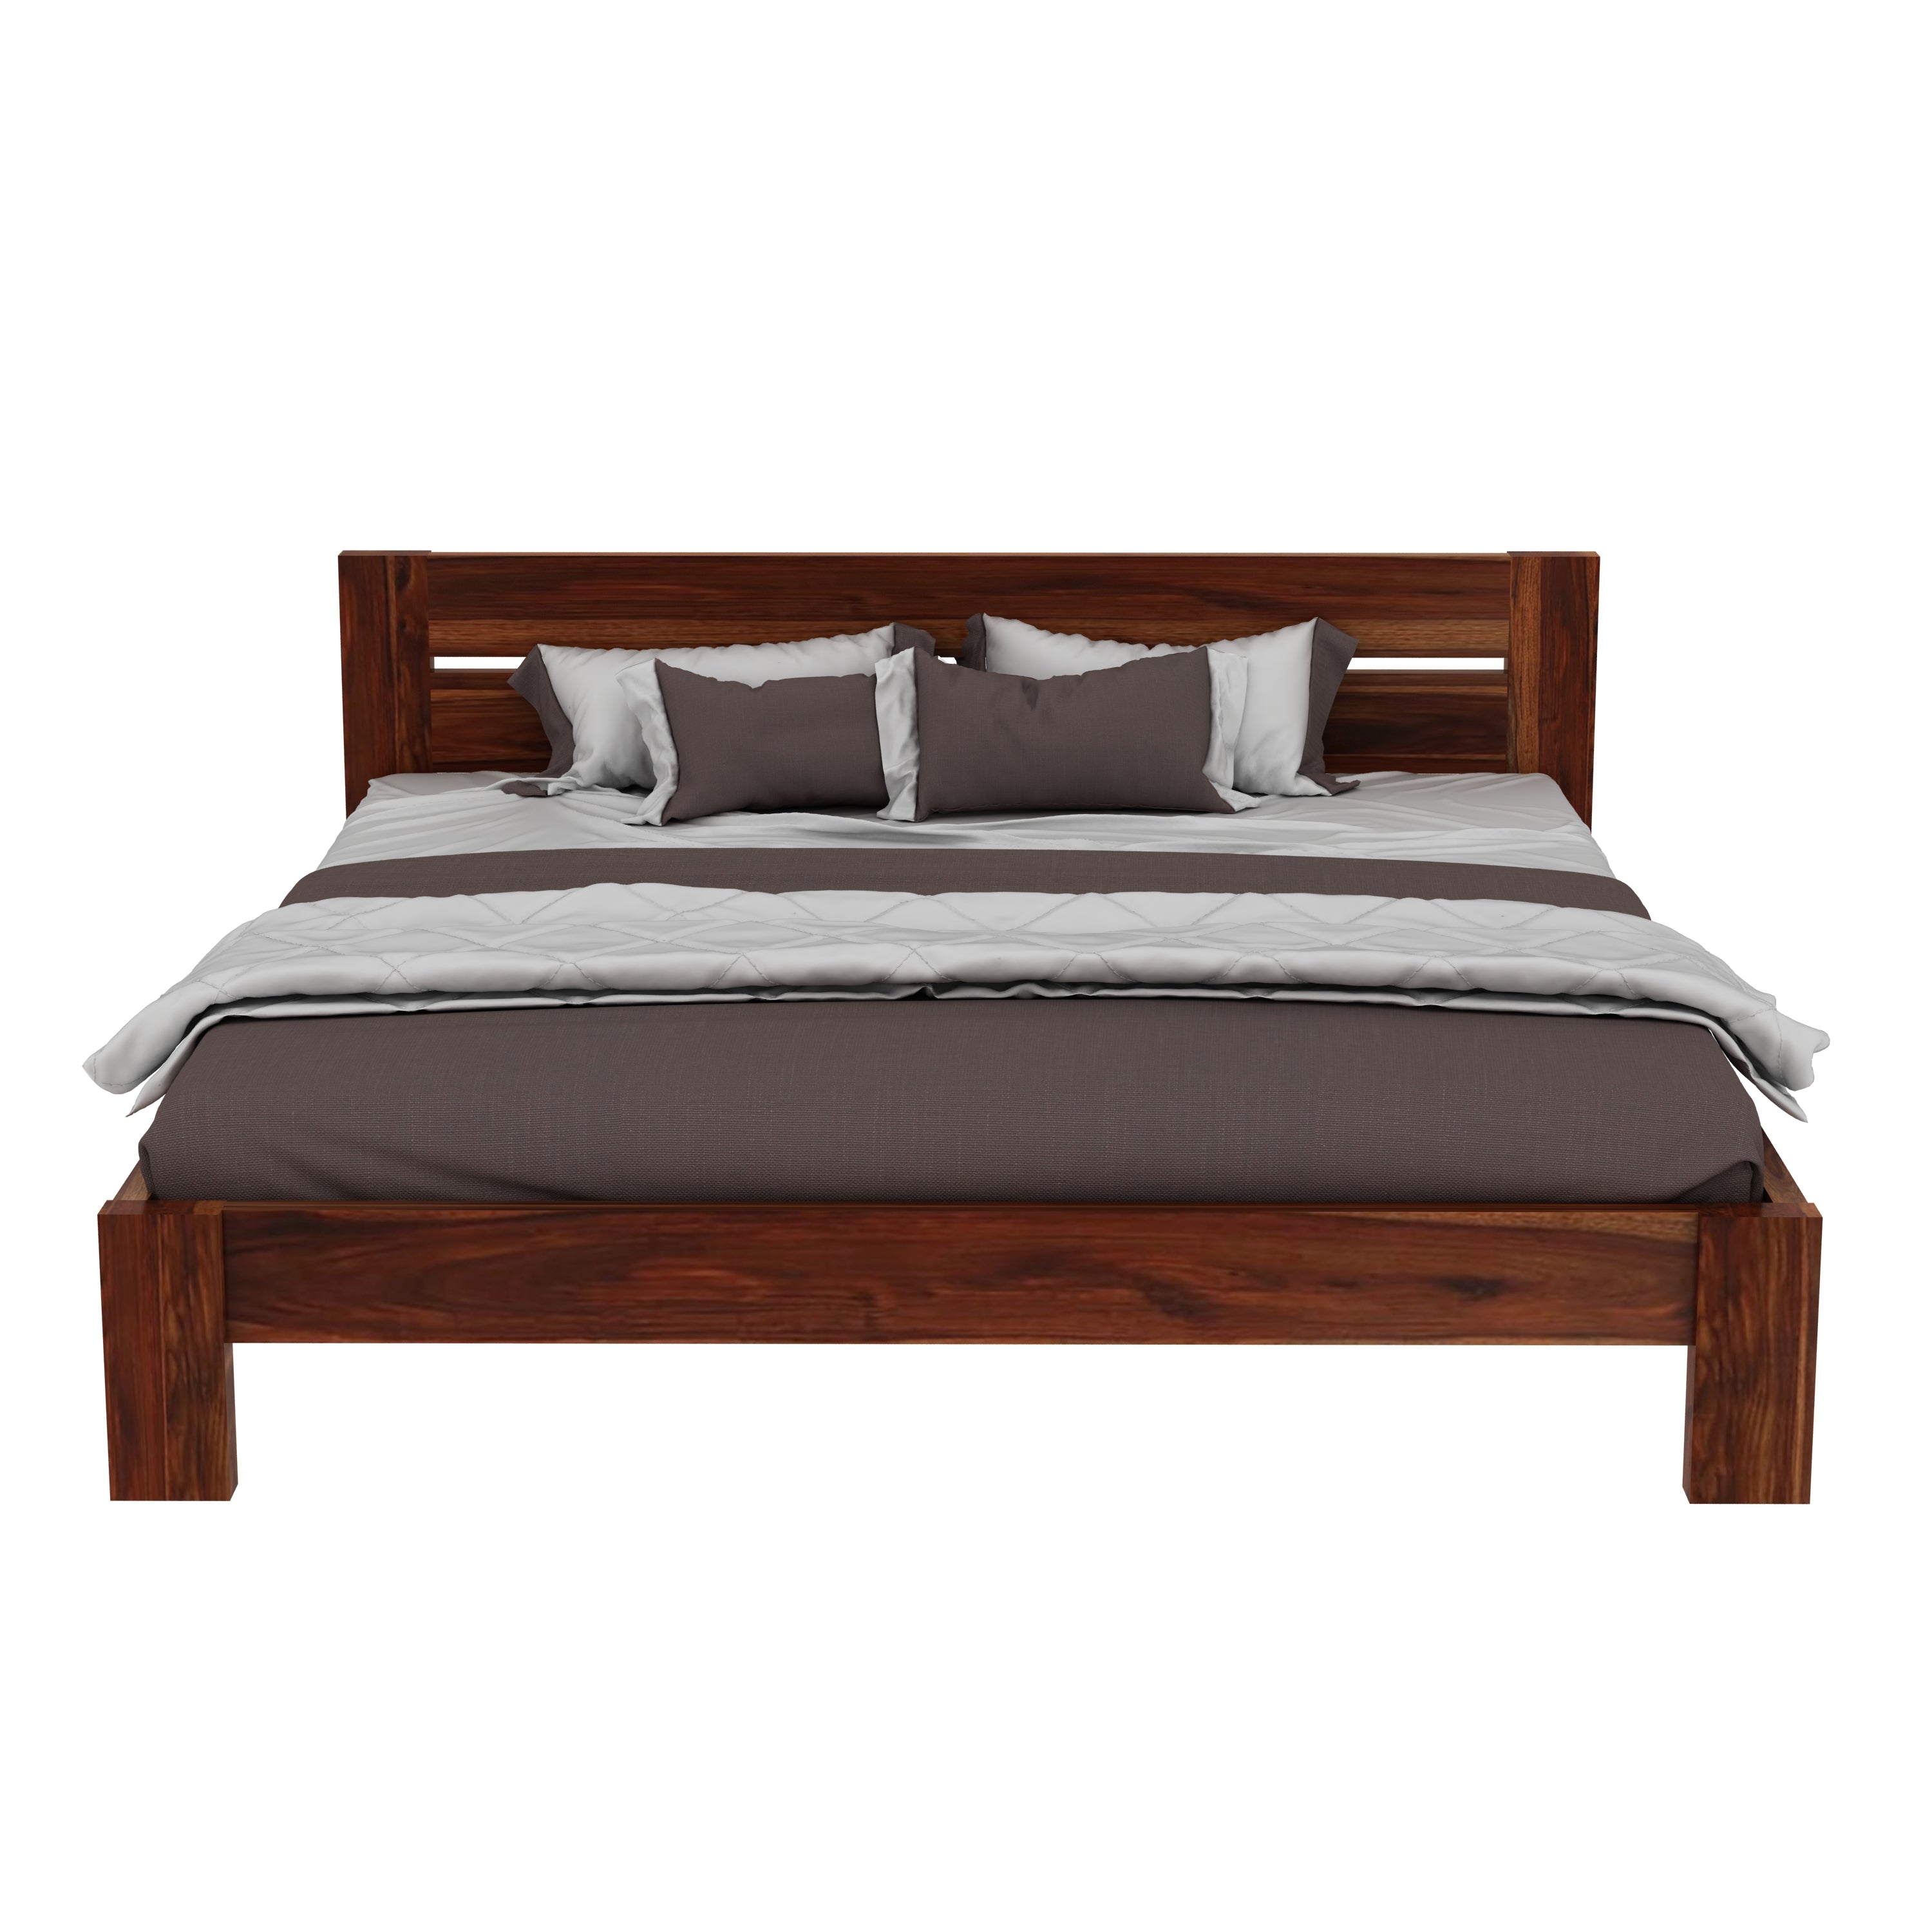 Maria Solid Sheesham Wood Bed Without Storage (Queen Size, Natural Finish)